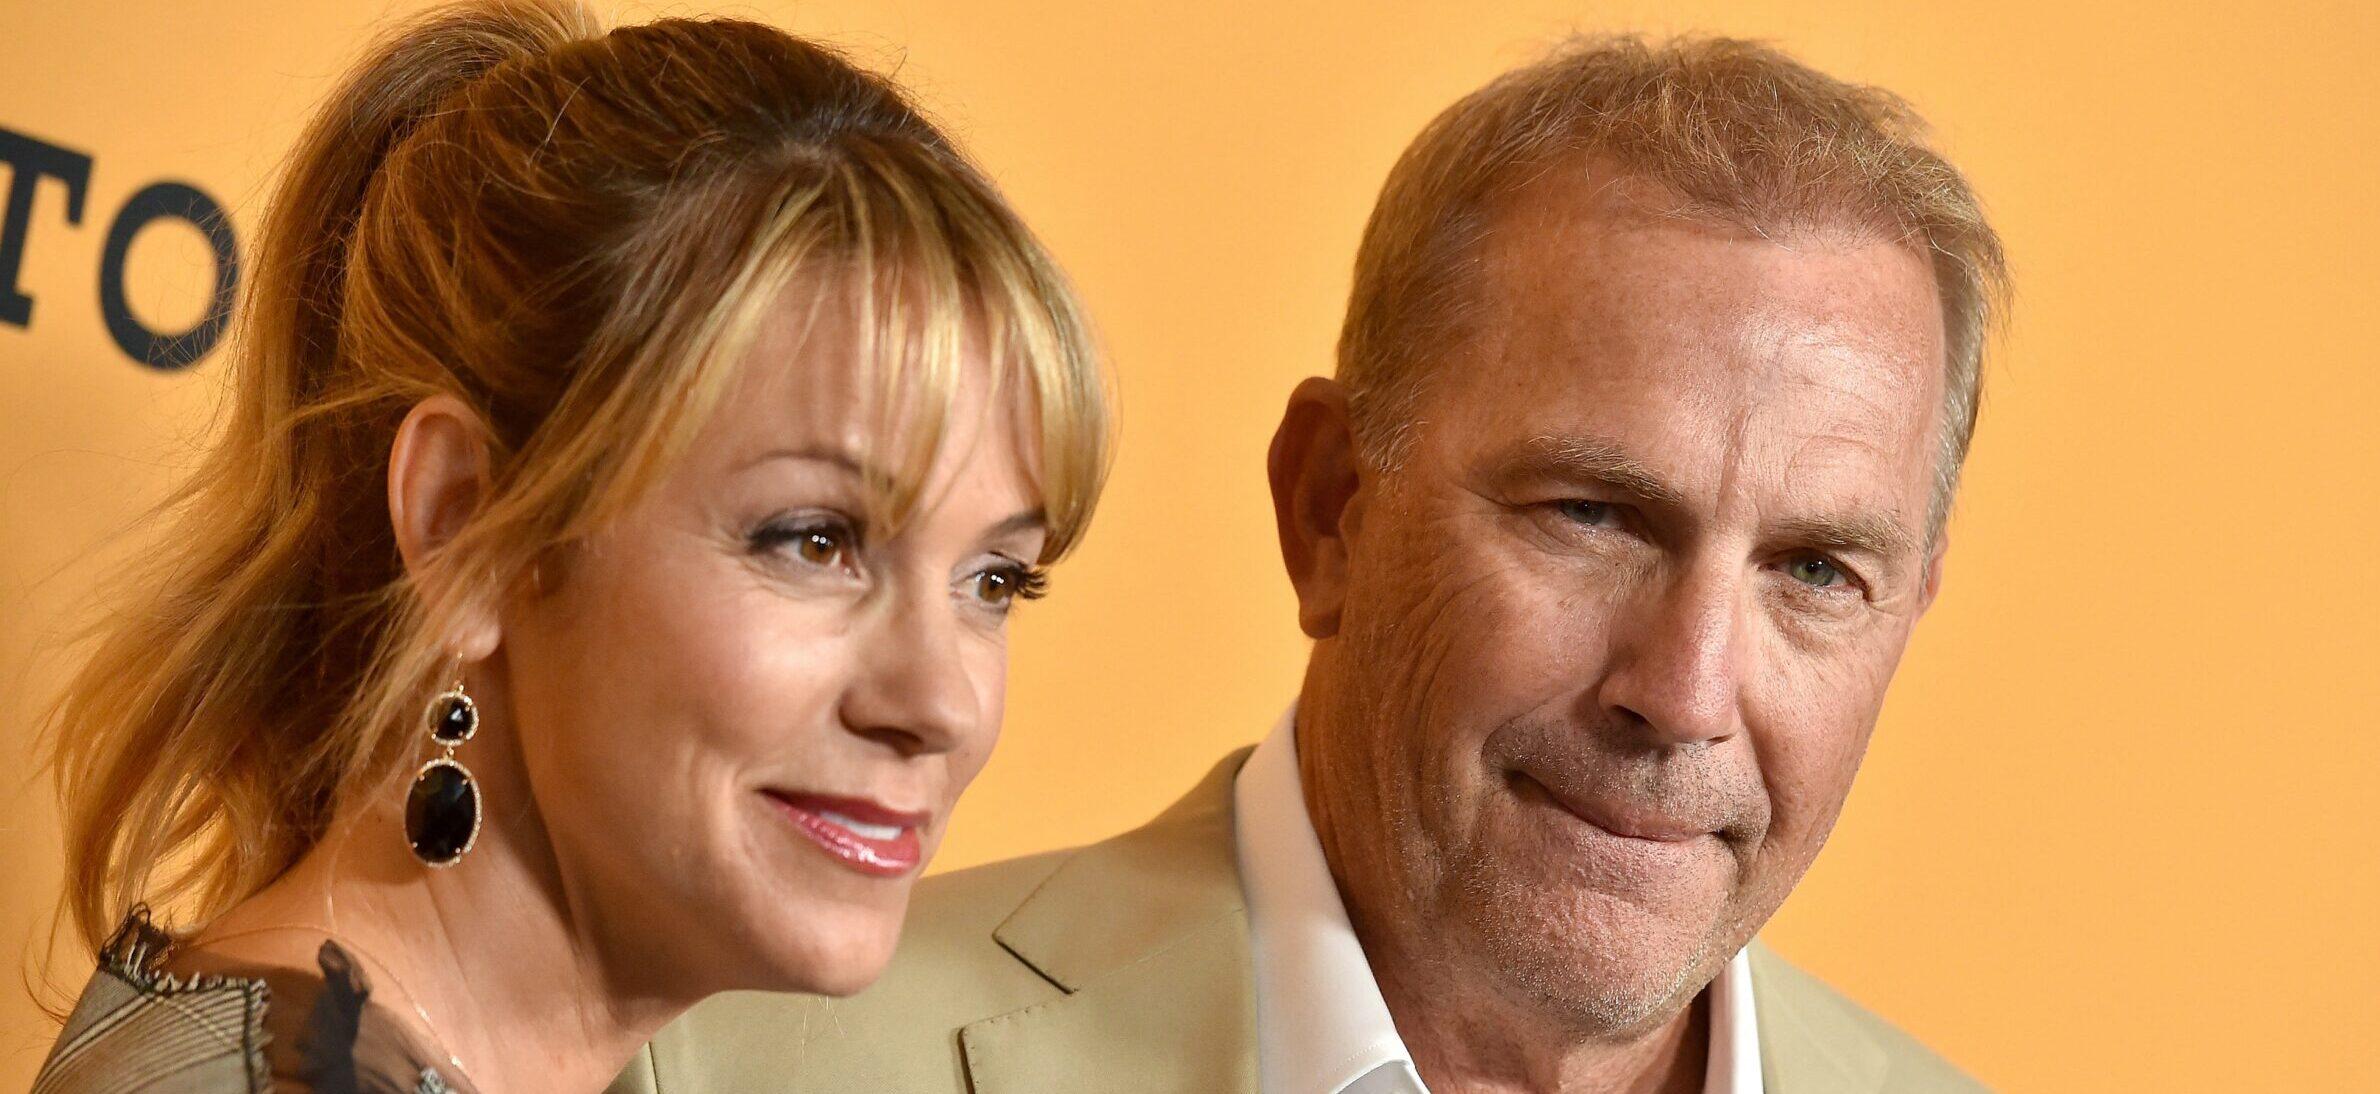 Kevin Costner Divorce Allegedly Sparked By His Busy Work Schedule